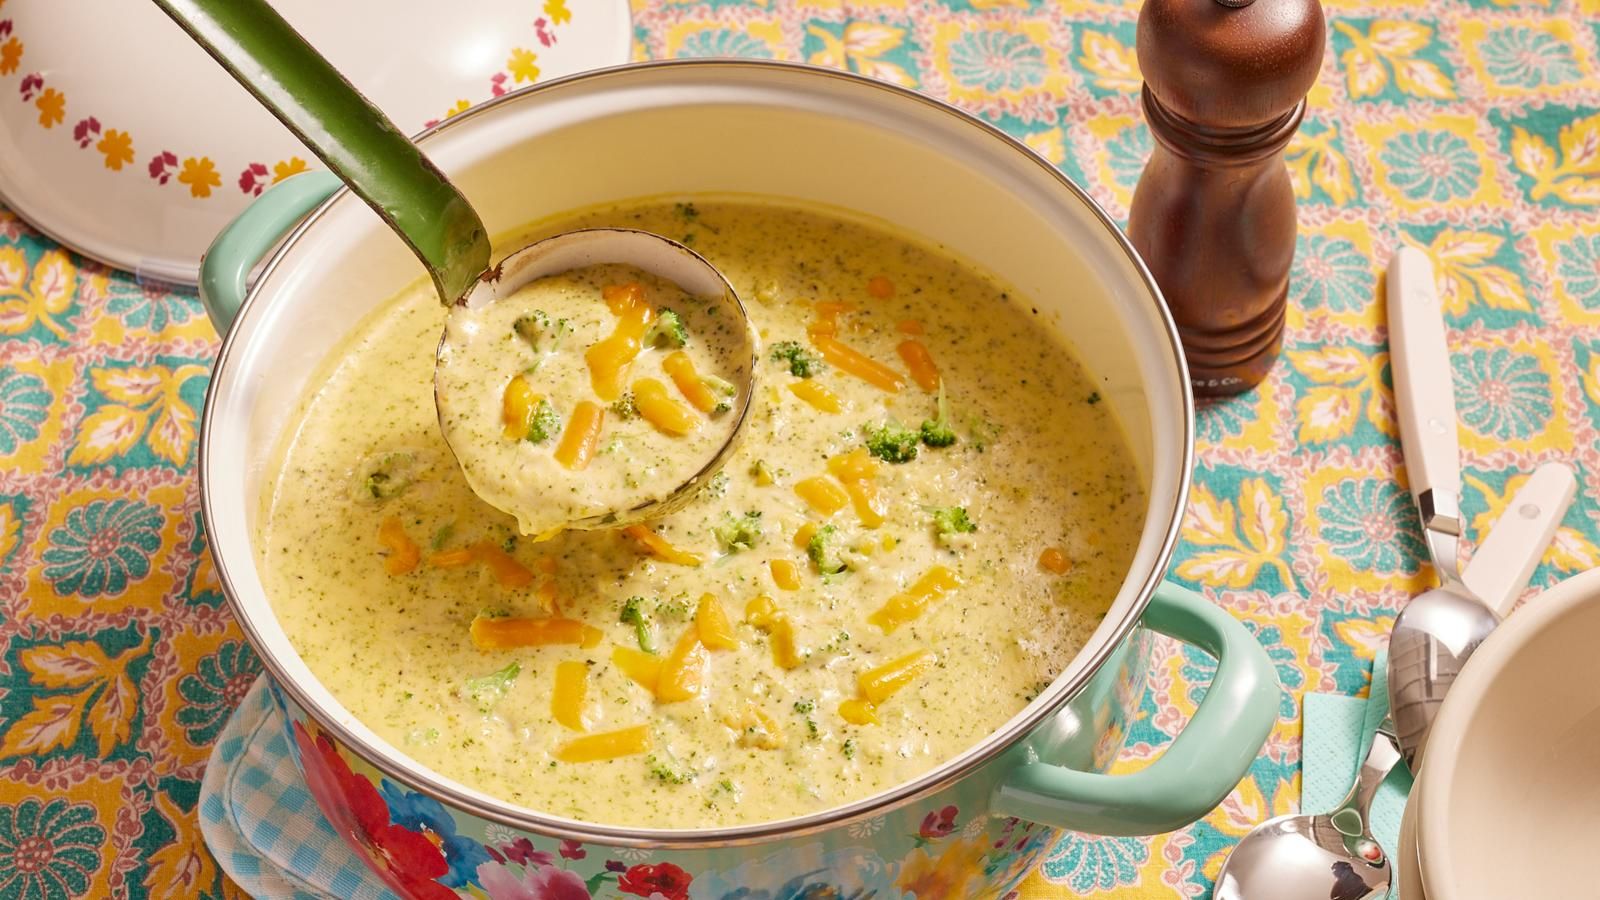 https://hips.hearstapps.com/hmg-prod/images/broccoli-cheese-soup-1626721180.jpg?crop=1xw:0.8434864104967198xh;center,top